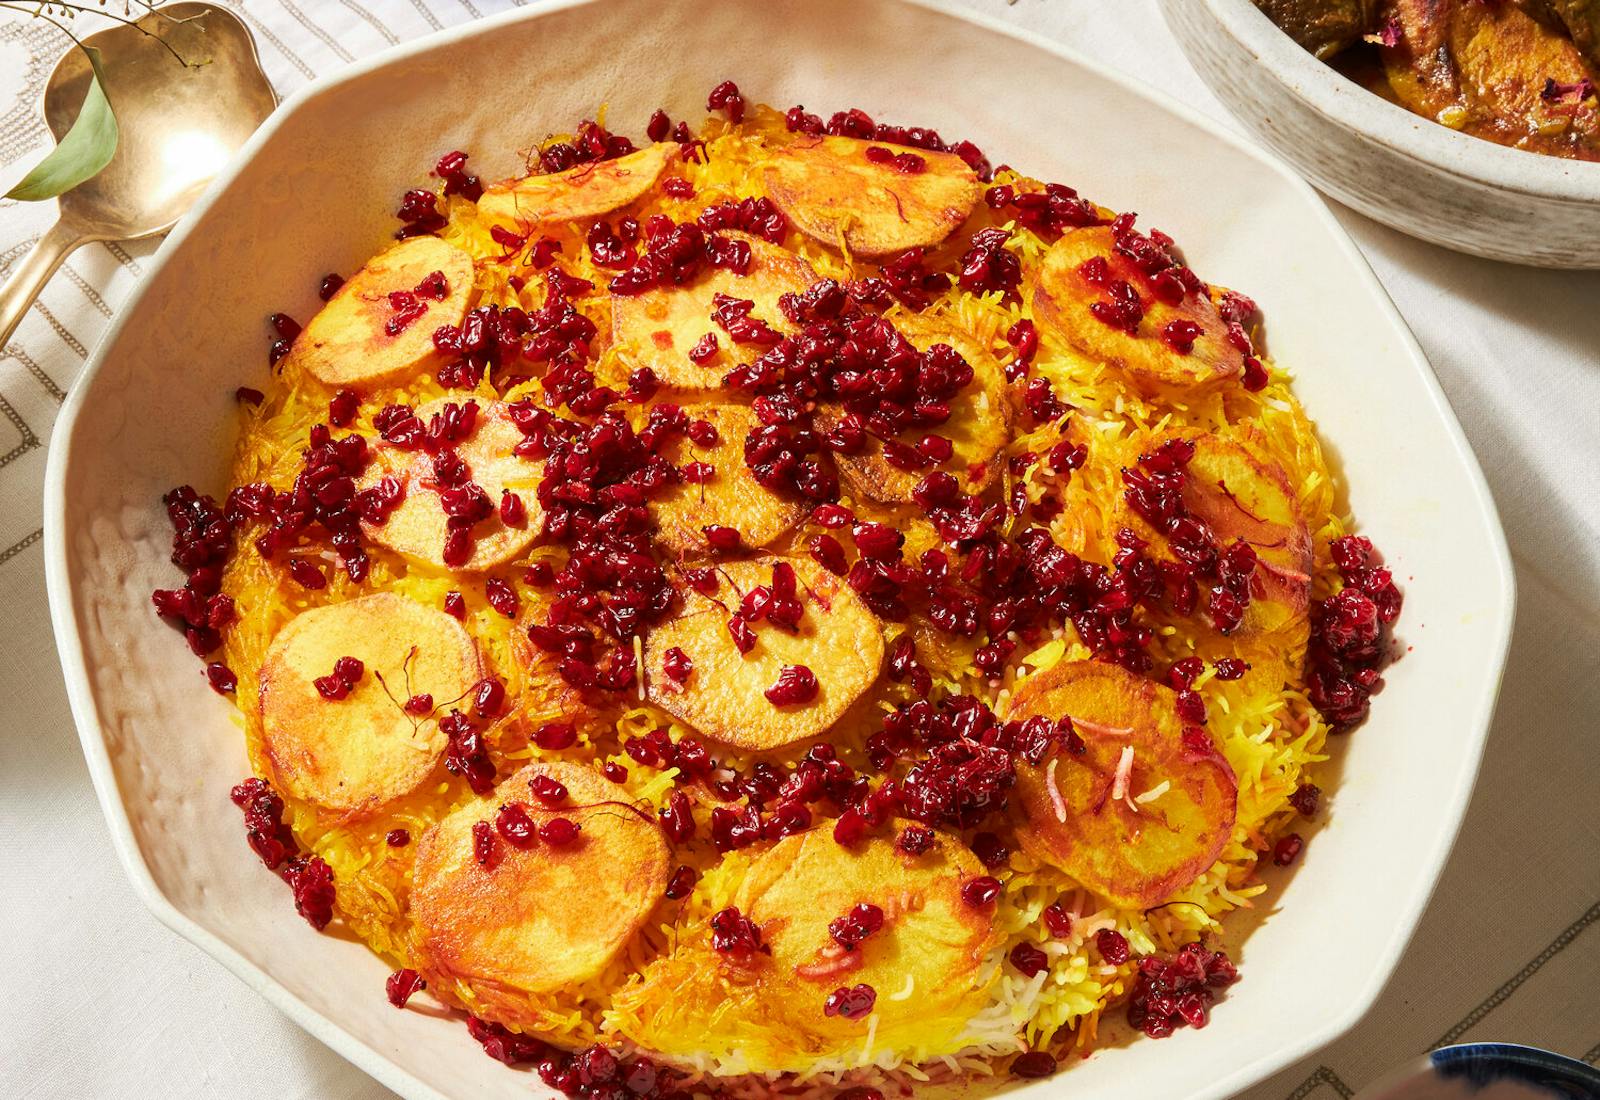 Tahdig with pomegranate kernels in large white bowl with glass of red wine and dish of rose petals.